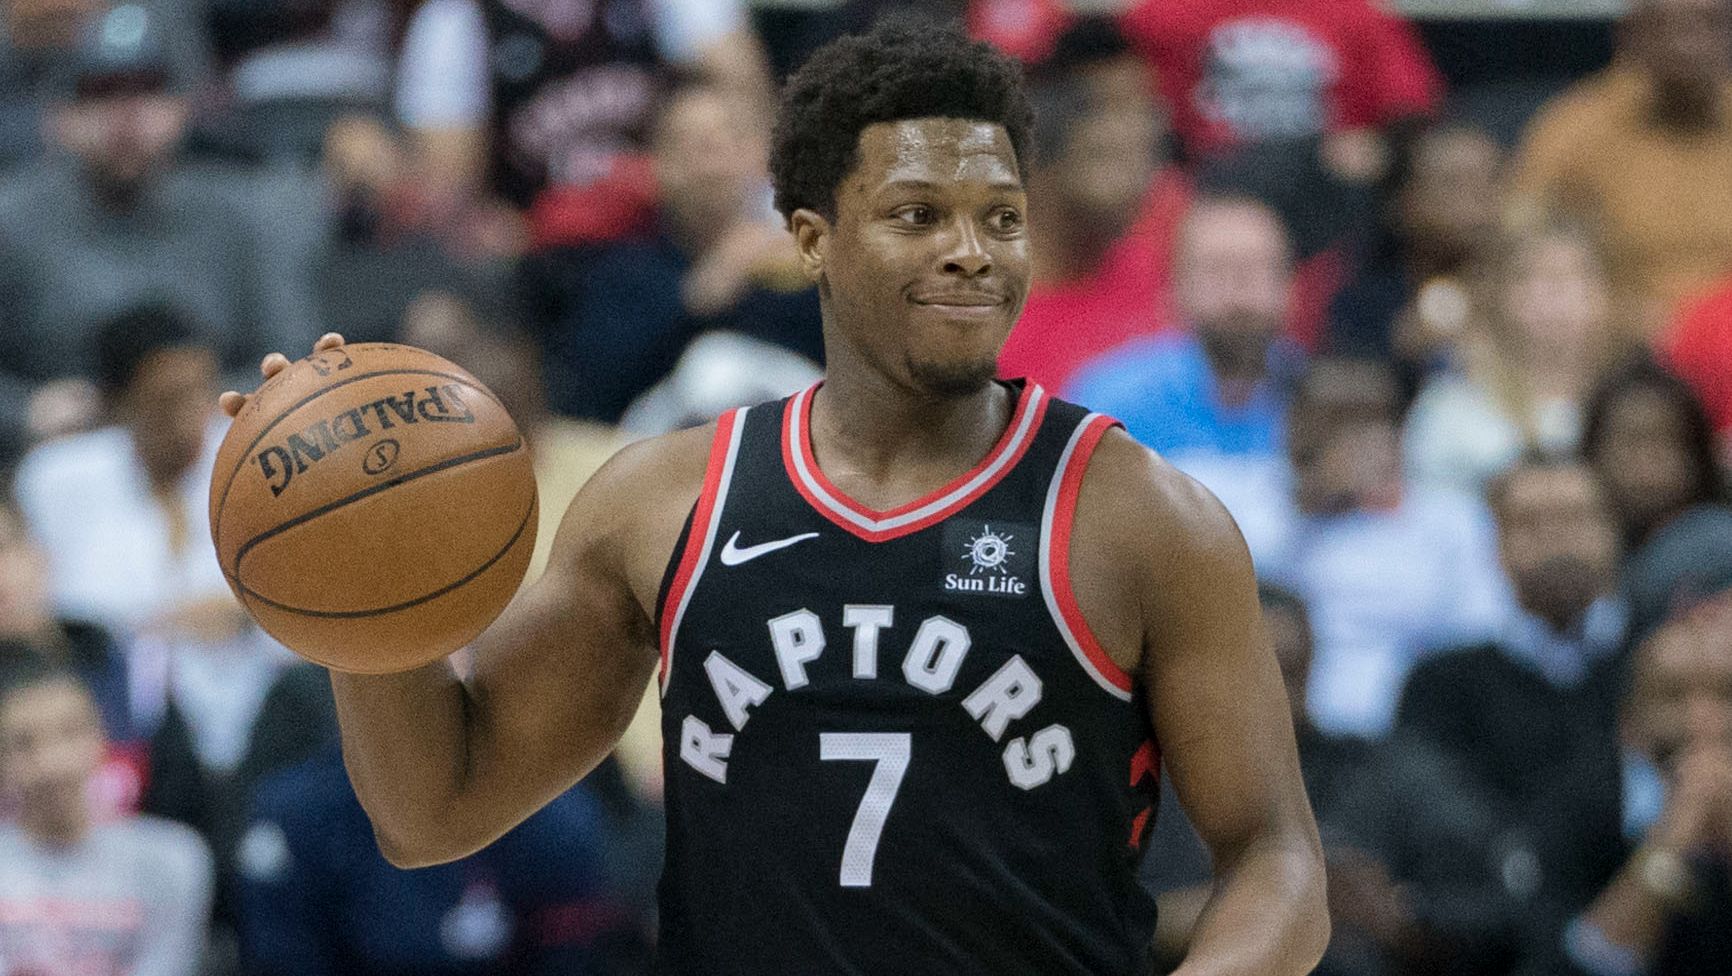 Kyle Lowry making plays for the Raptors